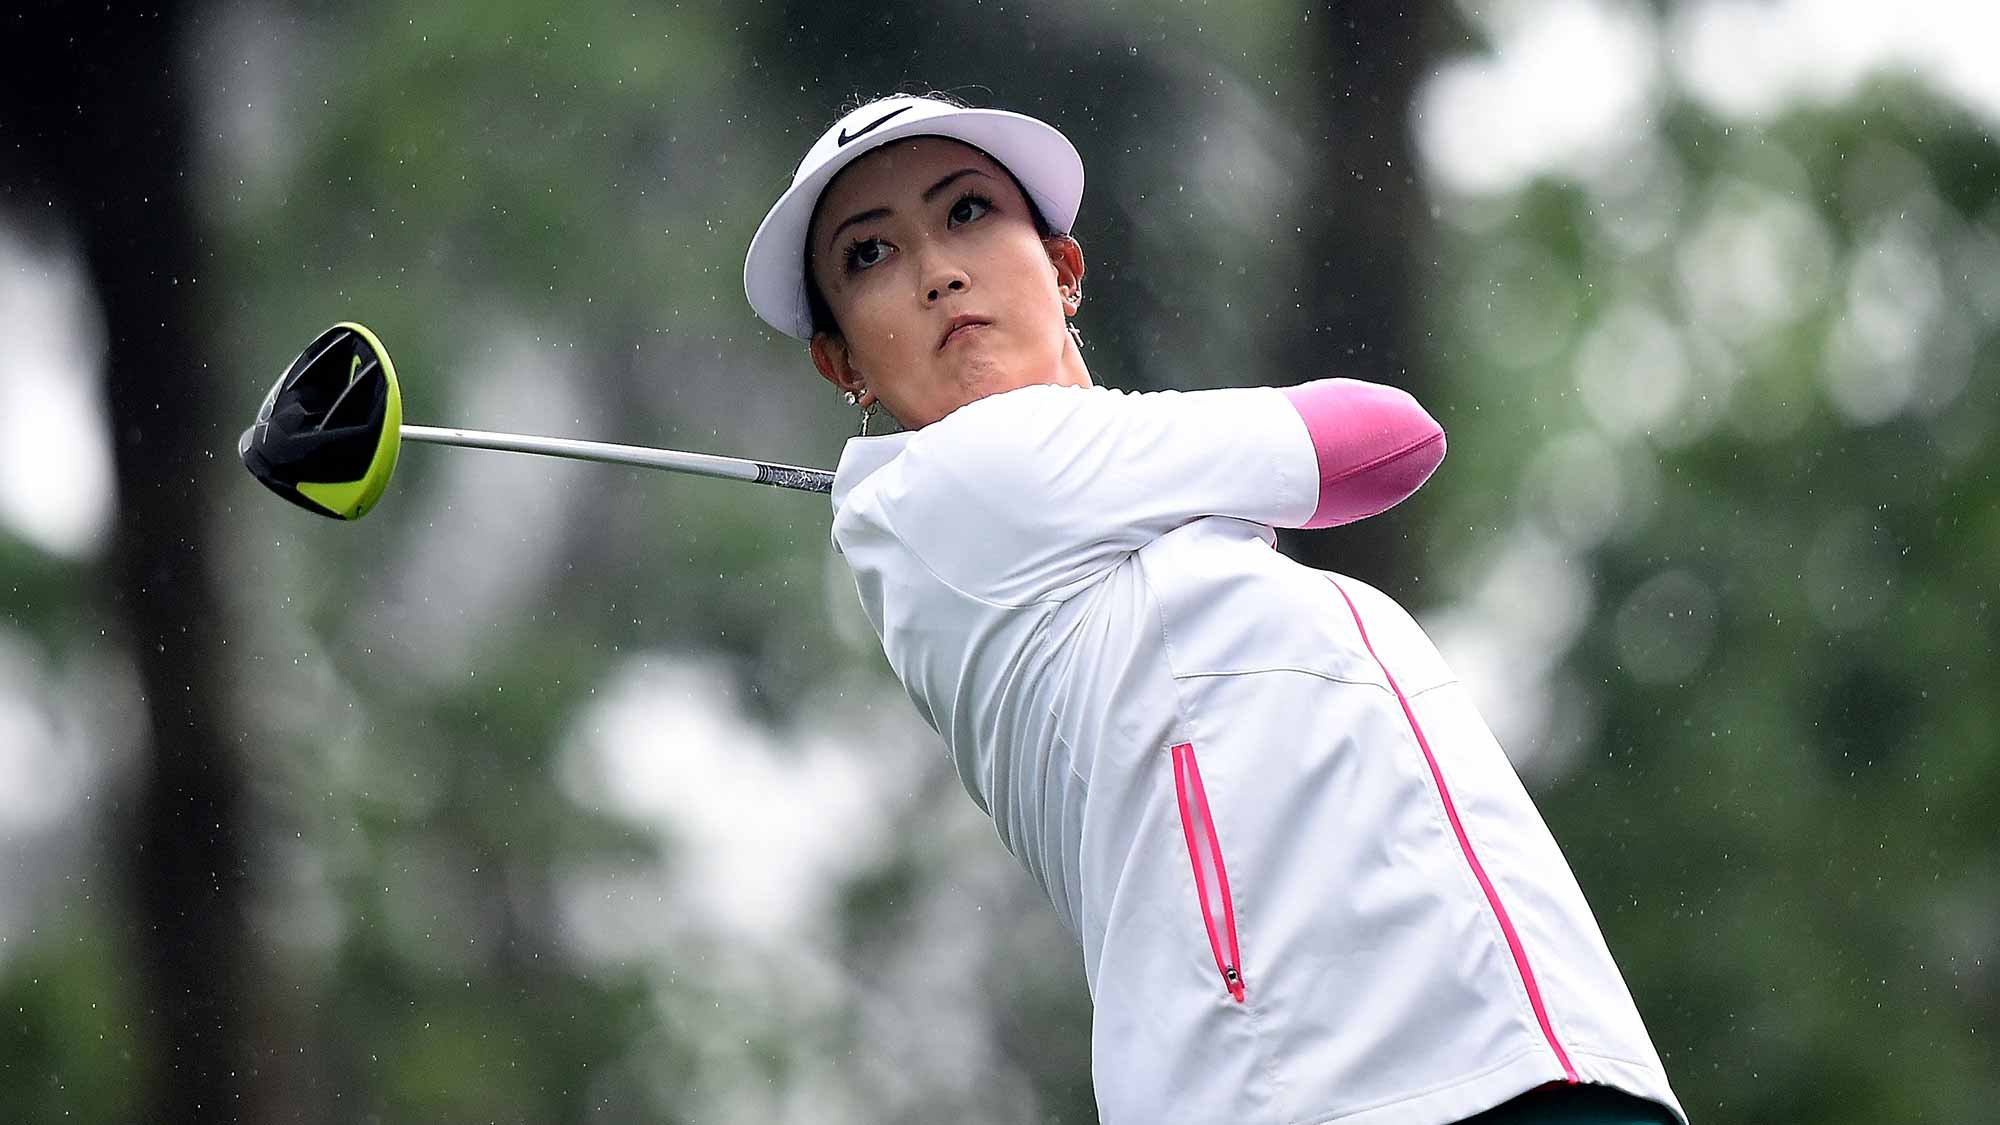 Michelle Wie of the United States plays the shot during the second round of 2015 Fubon LPGA Taiwan Championship at Miramar Golf Country Club